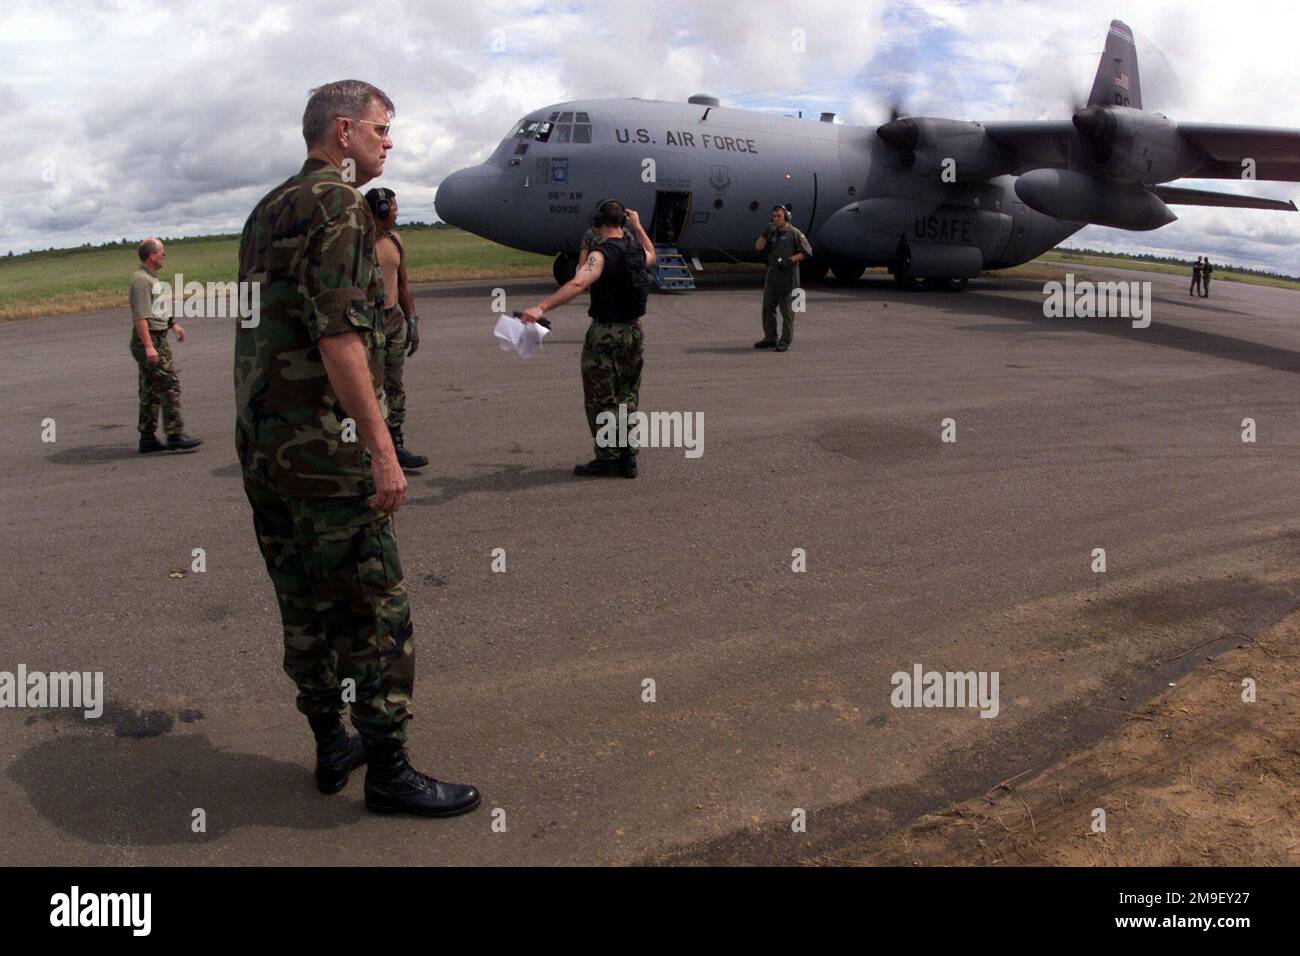 Medium shot. Major General Joe Wehrle, Joint Task Force Commander of Operation Atlas Response, 3rd Air Force Commander, Royal Air Force, Mildenhall, surveys the scenes at the International Airport in Maputo, Mozambique where a good portion of the relief airlift missions are originating, as a C-130 from the 37th Airlift Squadron, Ramstein Air Base, taxis in to be loaded with humanitiarian relief supplies on 17 March 2000. Operation Atlas Response, is a Humanitarian Aid Operation to help the people of Mozambique, after severe flooding displaced over a million people from their homes. Subject Ope Stock Photo